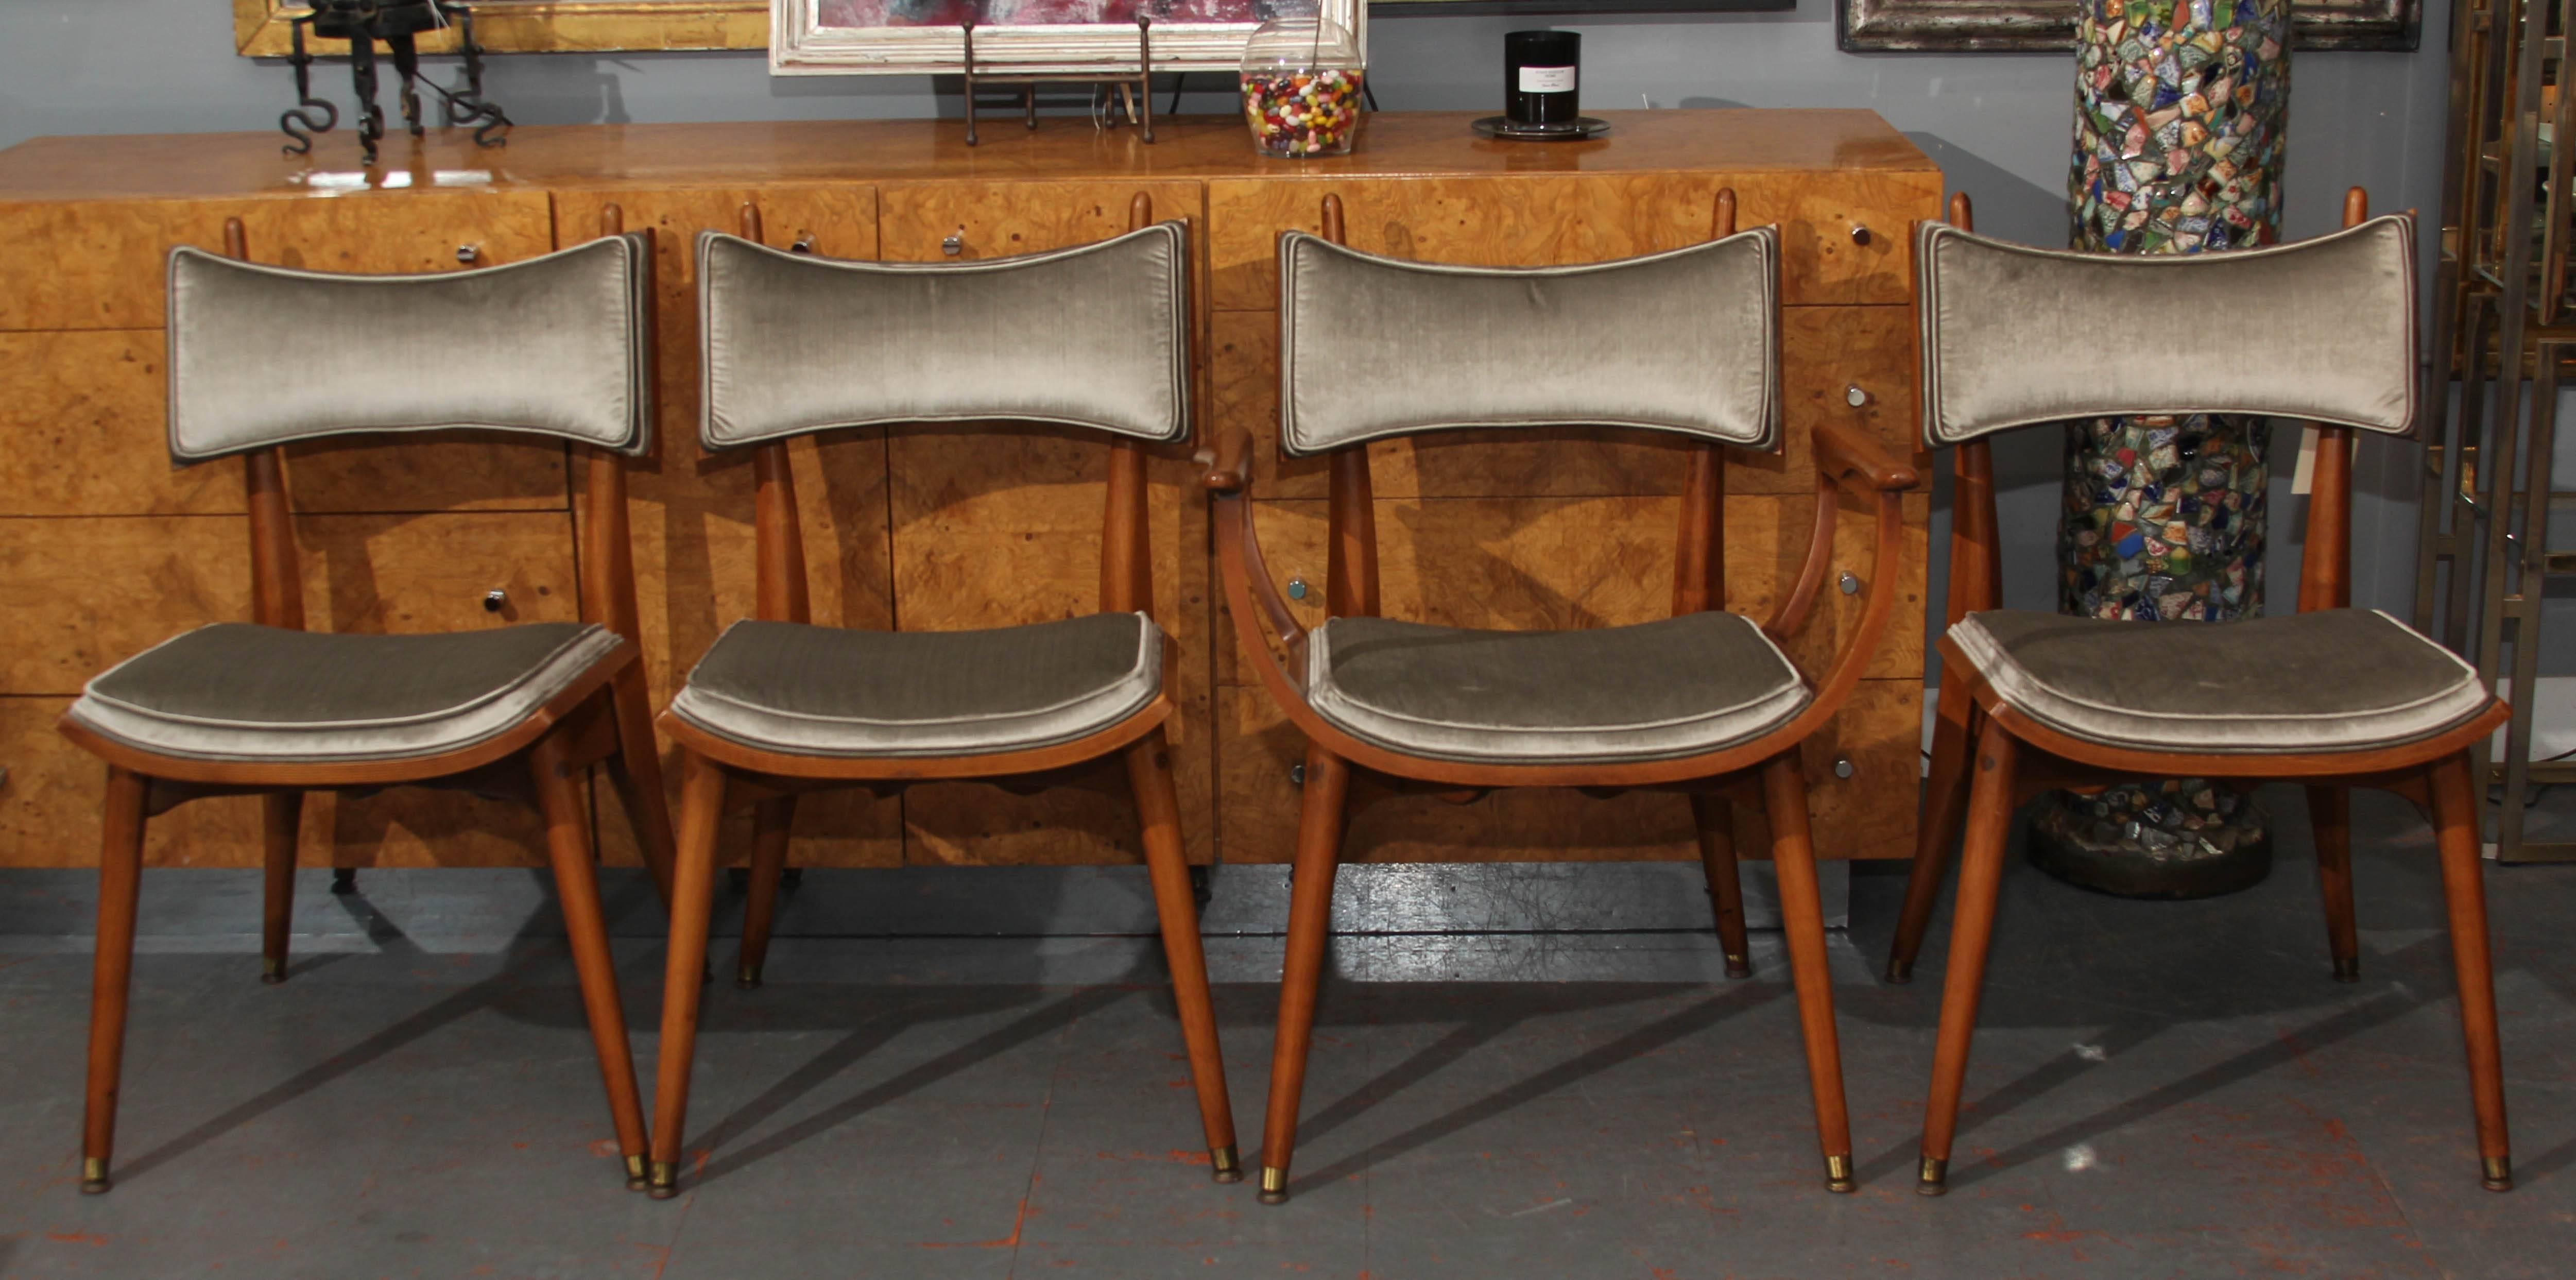 Great set of four wood frame chairs in pearl grey silk velvet. One armchair, three armless. Comfortable with great lines, perfect for dining or as side chairs. Handsome from every angle.